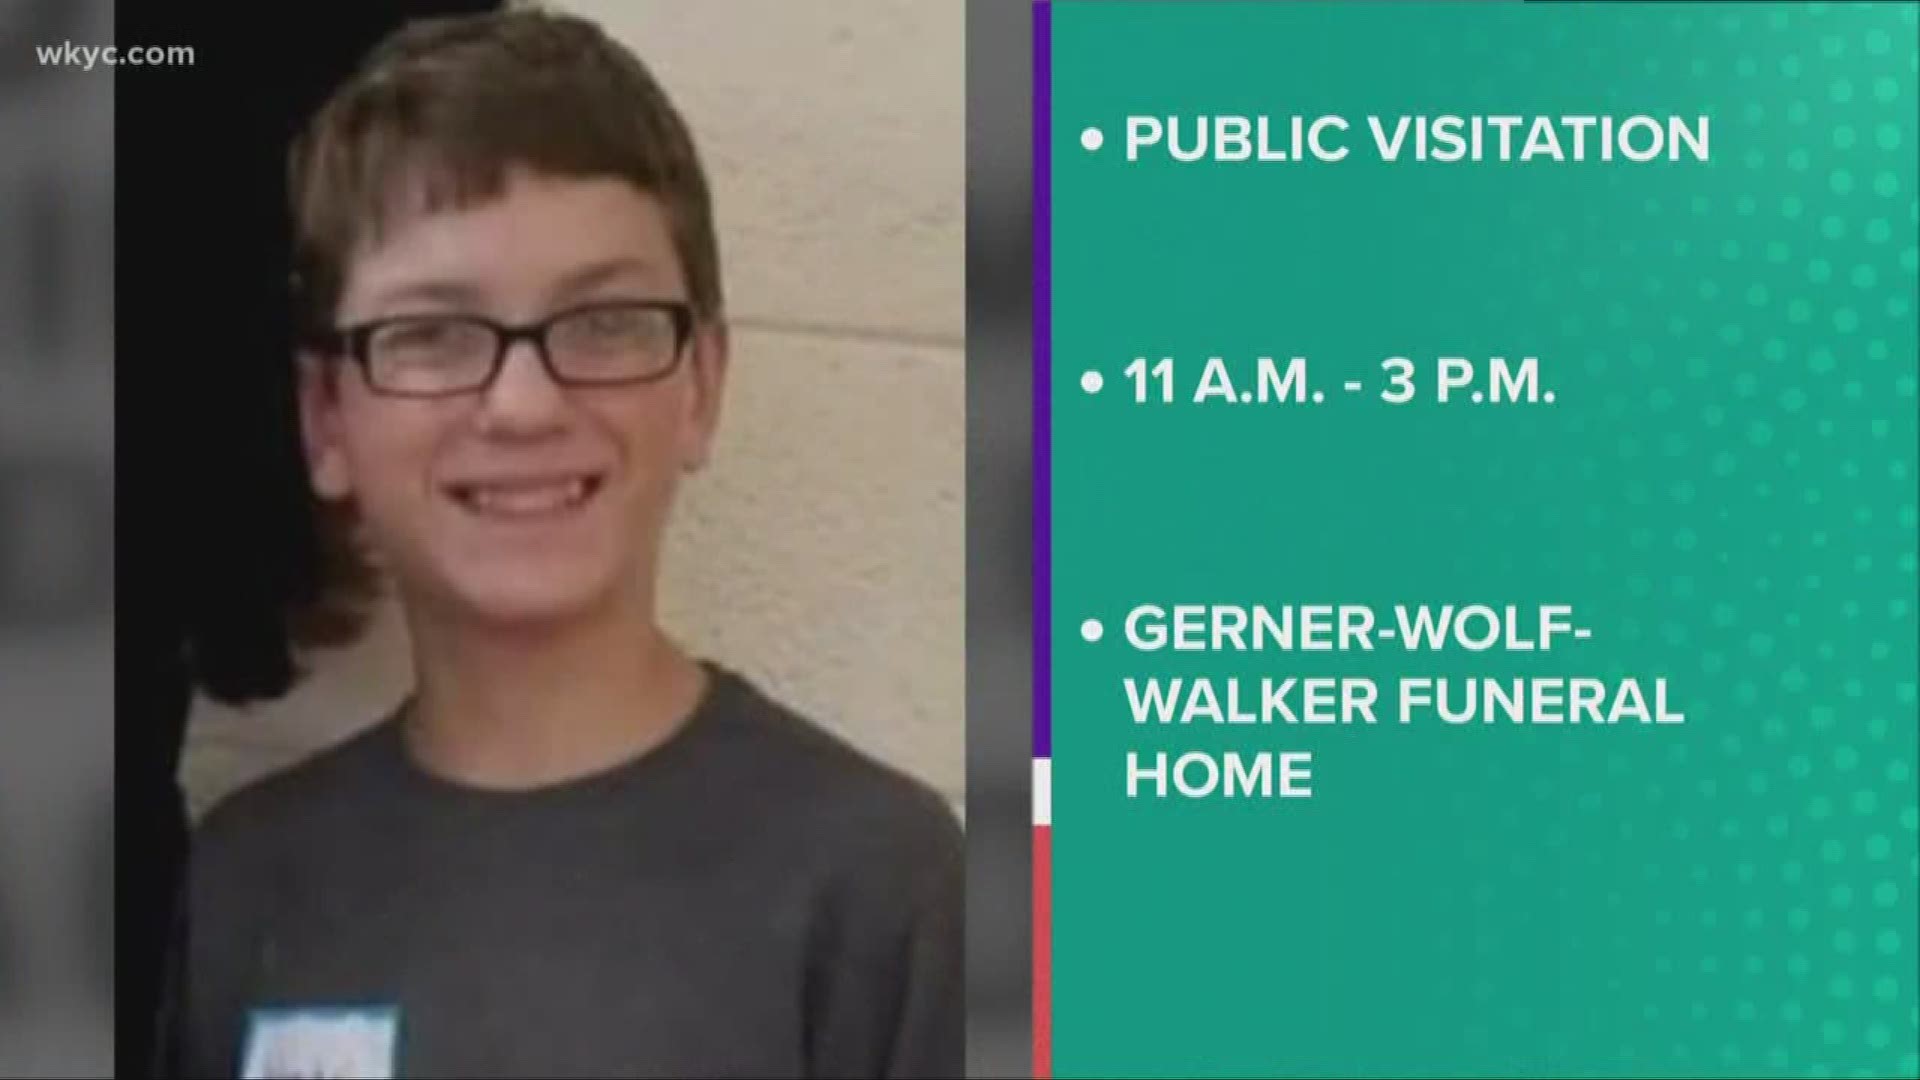 The wake will take place at the Gerner-Wolf-Walker Funeral Home in Port Clinton from 11 a.m. - 3 p.m. A memorial luncheon will also be open to the public.